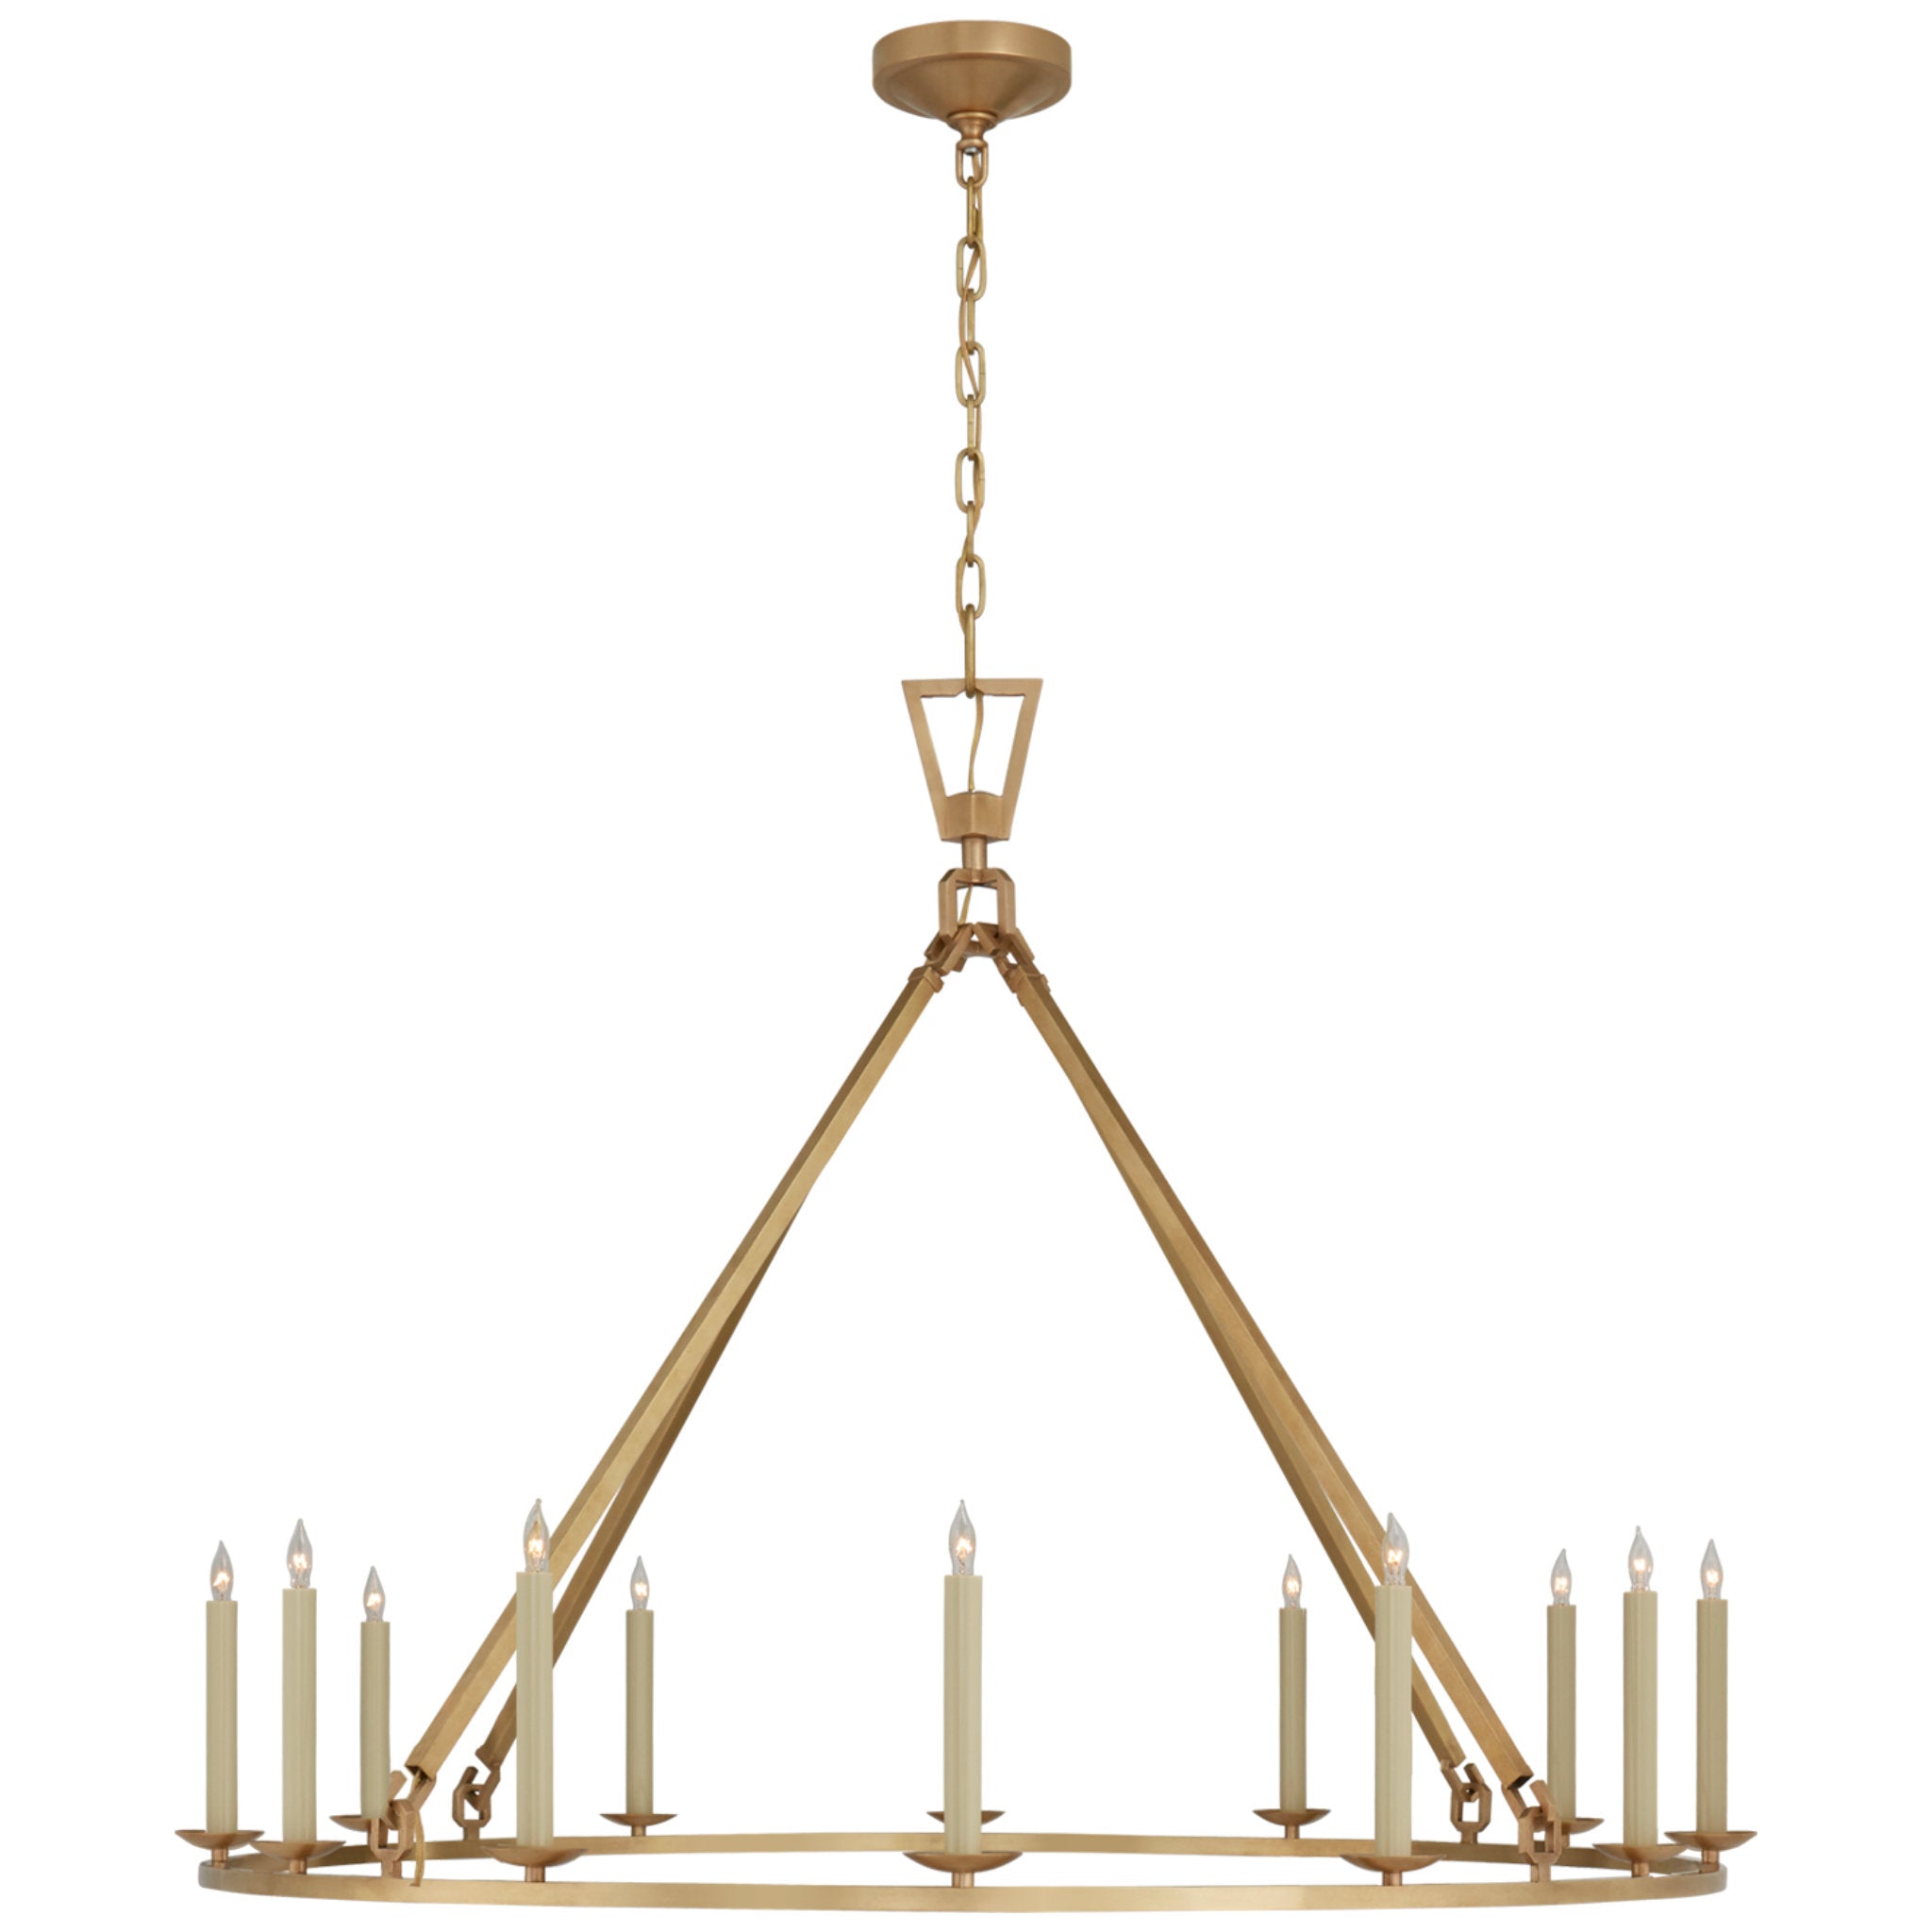 Chapman & Myers Darlana Extra Large Single Ring Chandelier in Antique-Burnished Brass